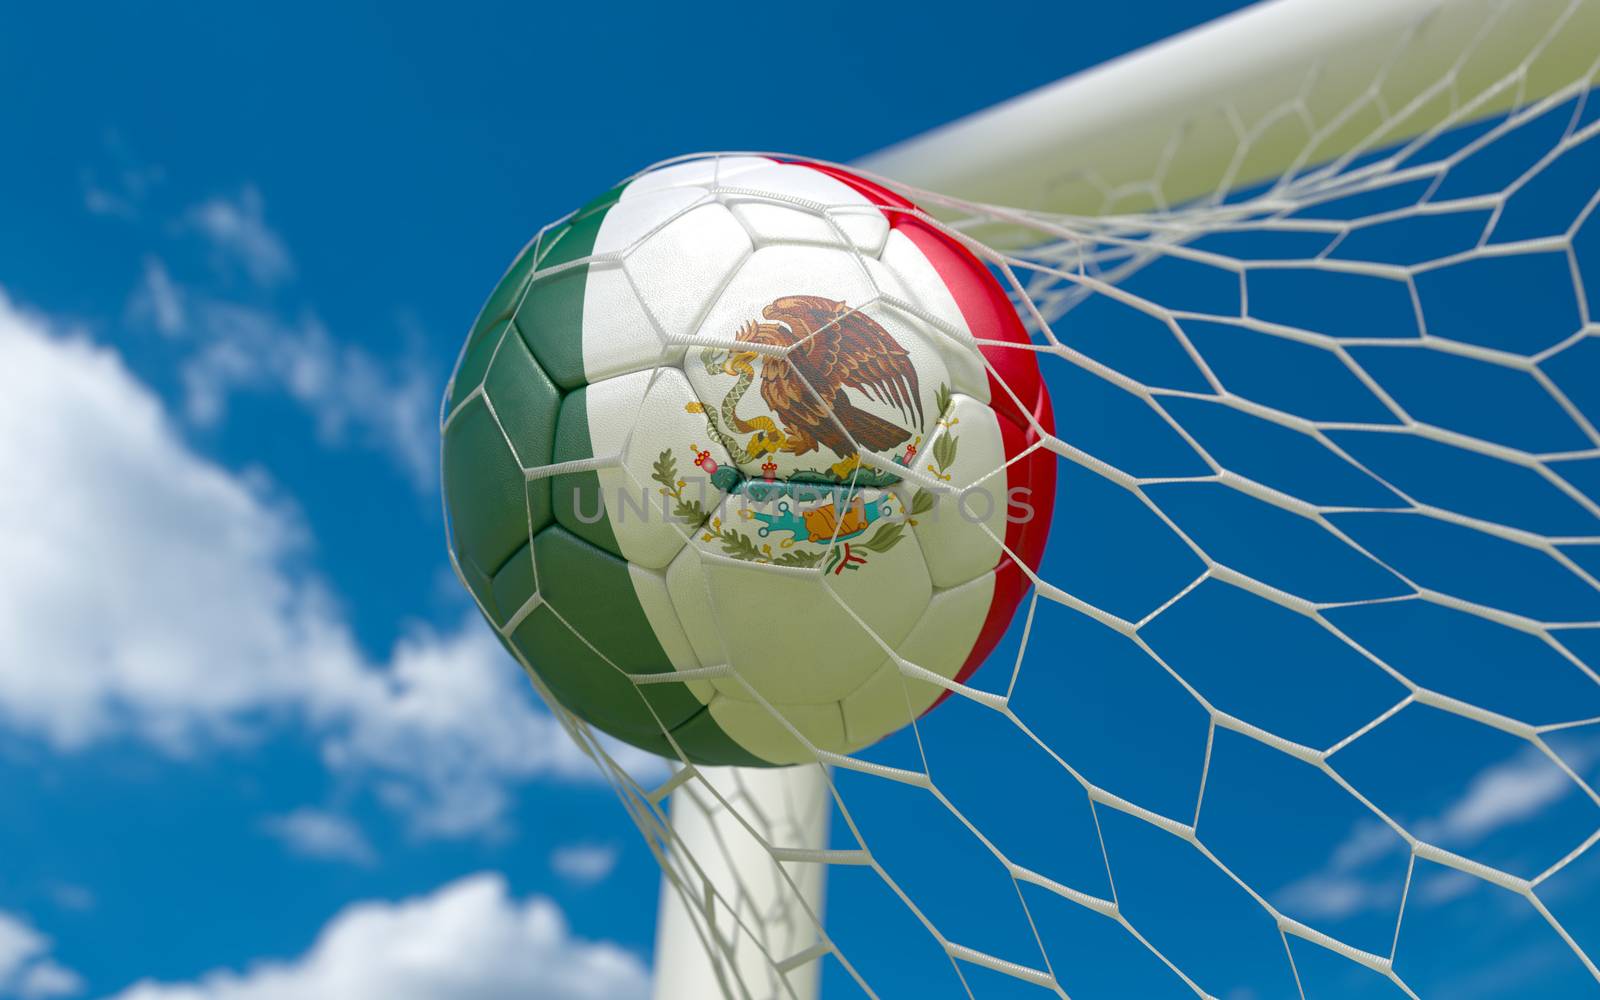 Mexican flag and soccer ball in goal net by Barbraford